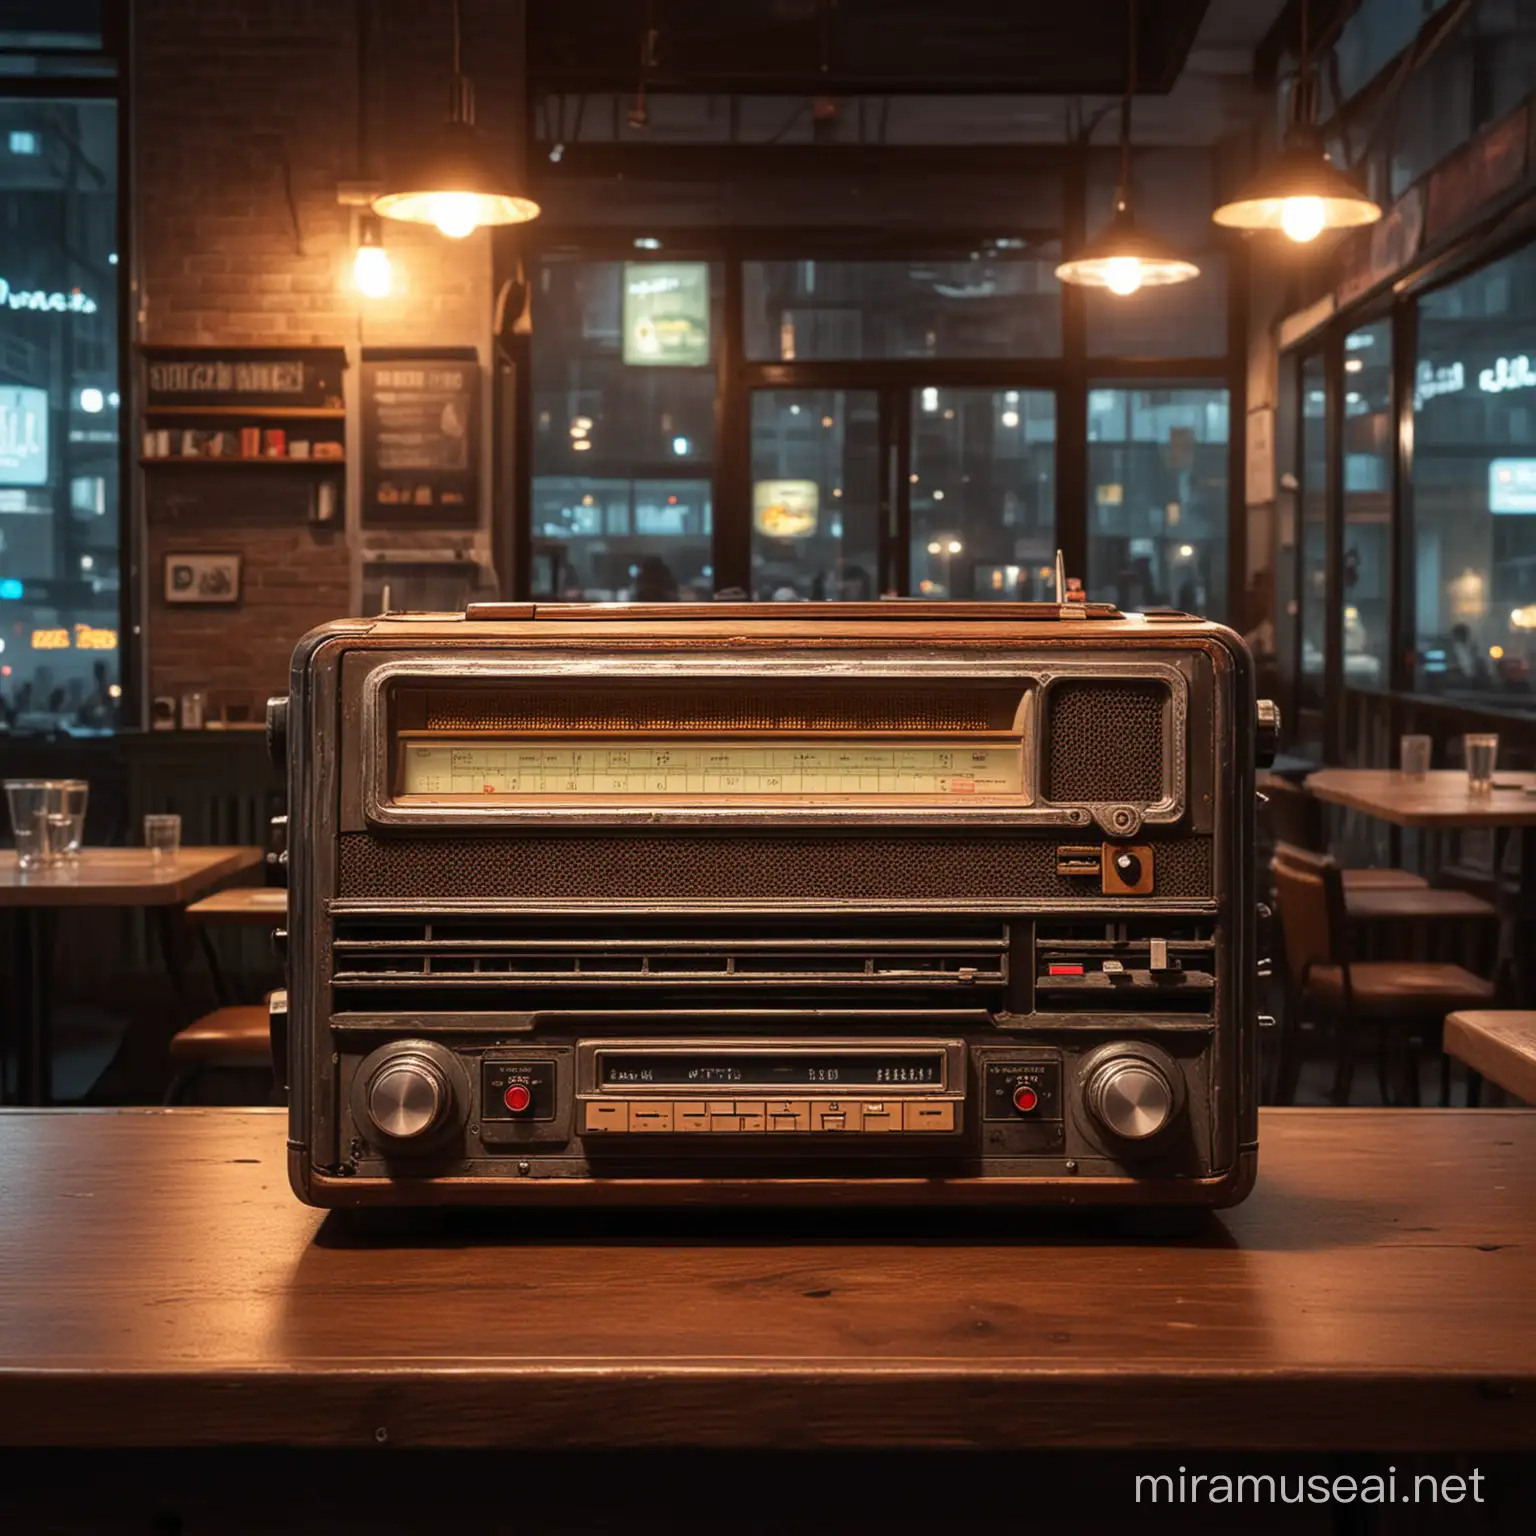 A vintage radio in a cafe in a cyberpunk night city